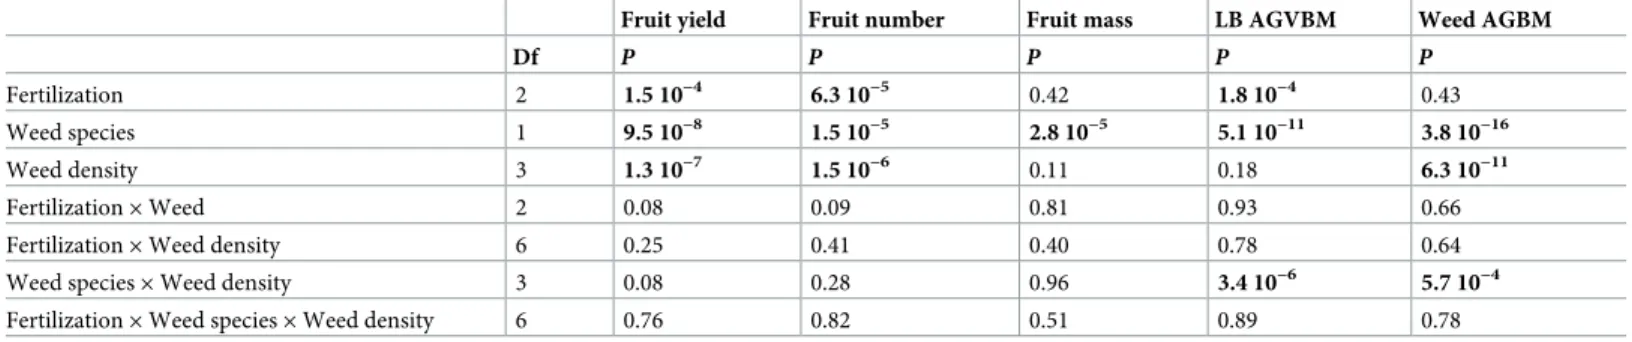 Table 1. Results of the mixed-model analyses for the tested variables of lowbush blueberry